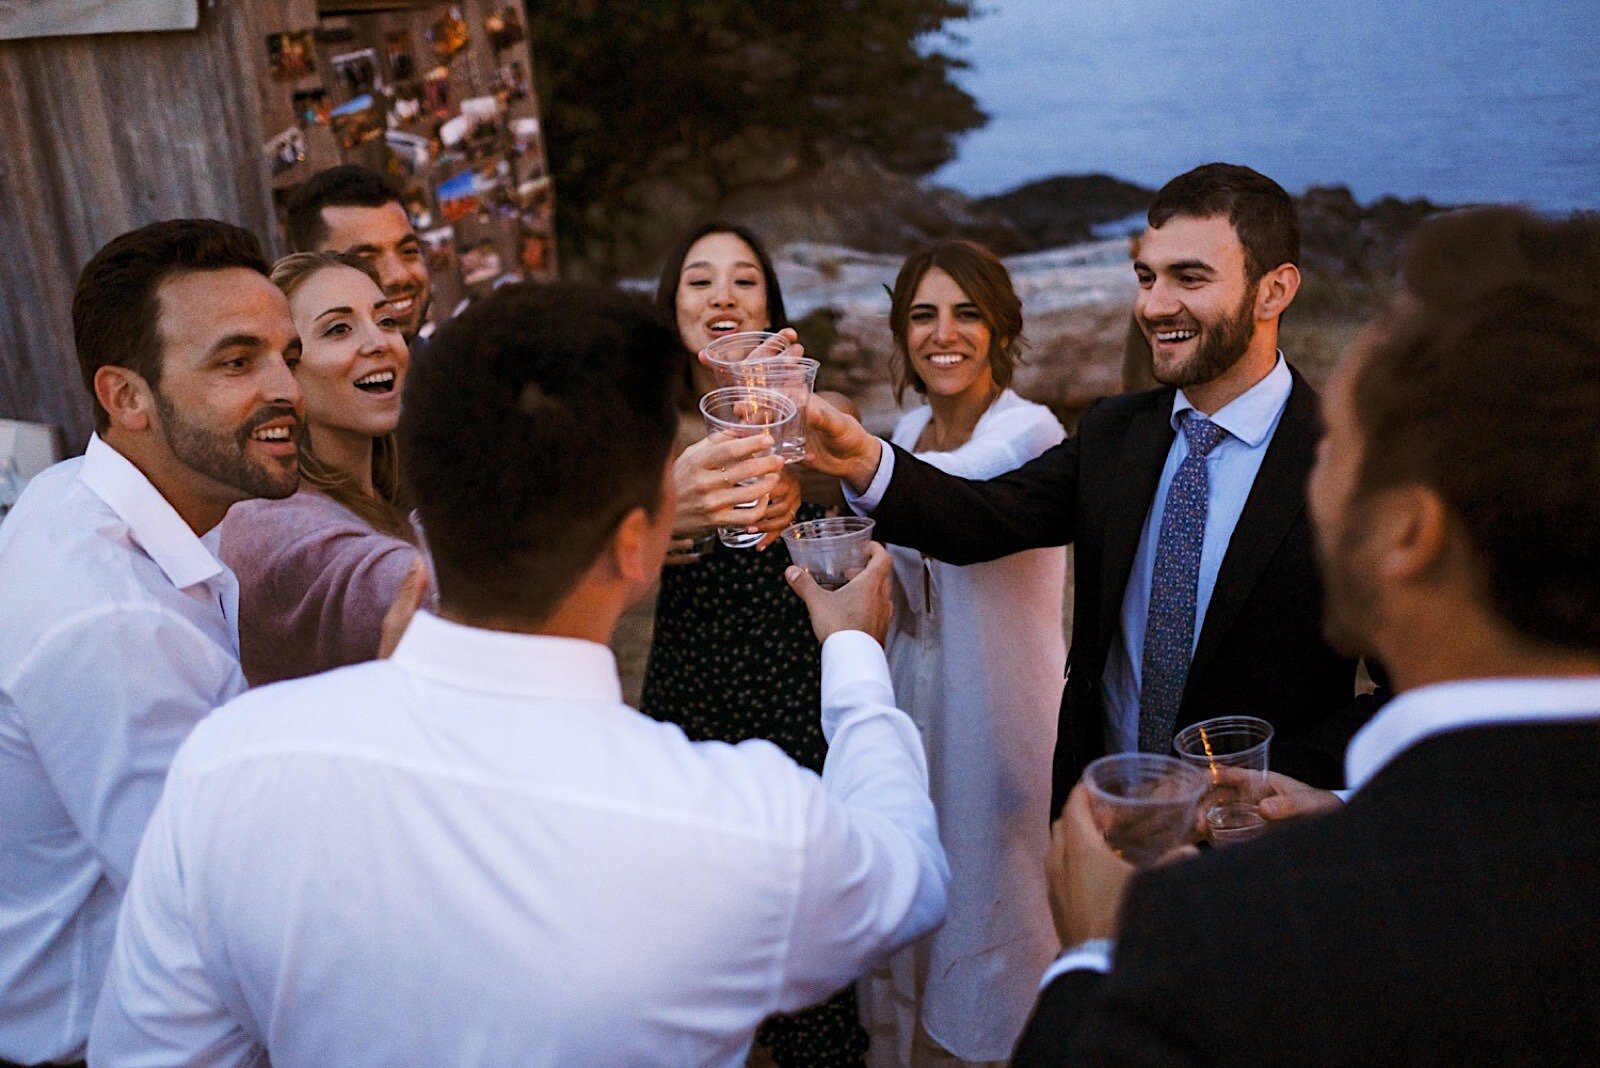 91_Island_photographer_Reception_In_seattle_by_Wedding_Outdoor_Orcas_best_documentary.jpg